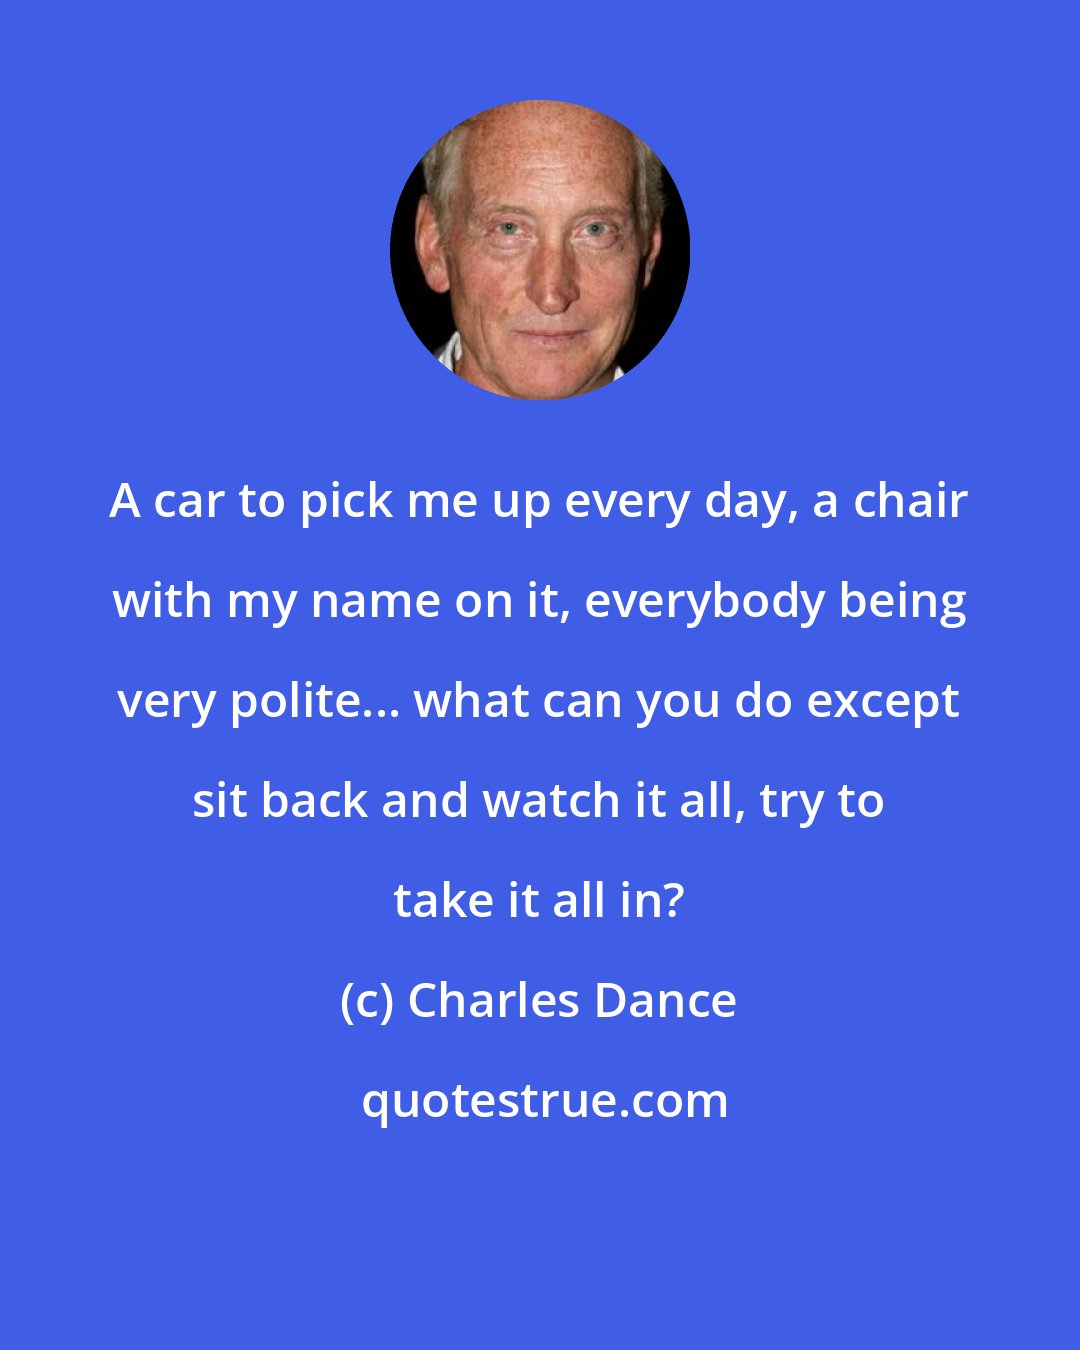 Charles Dance: A car to pick me up every day, a chair with my name on it, everybody being very polite... what can you do except sit back and watch it all, try to take it all in?